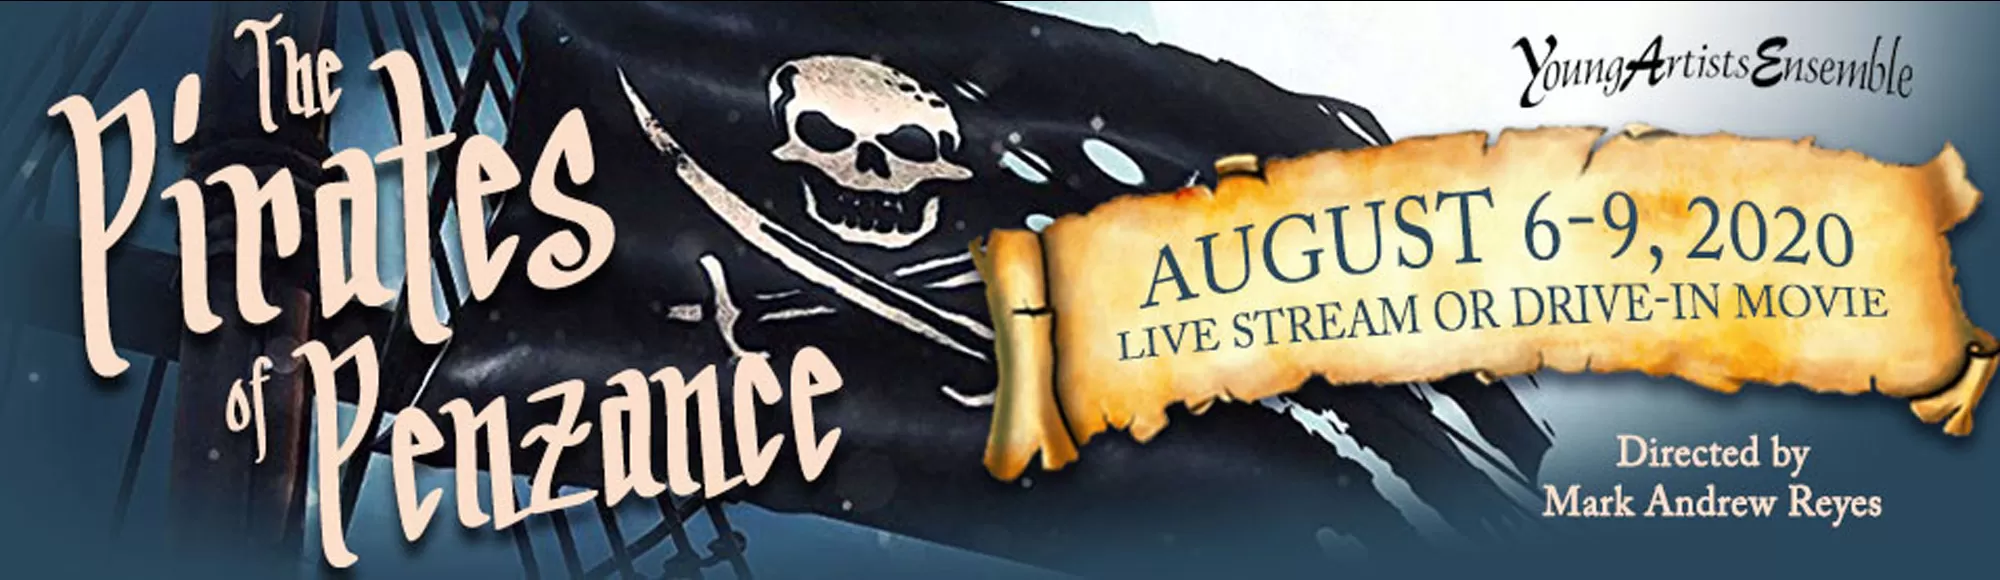 Drive-In Full Cast Live 8/9/20 The Pirates of Penzance - Live Stream